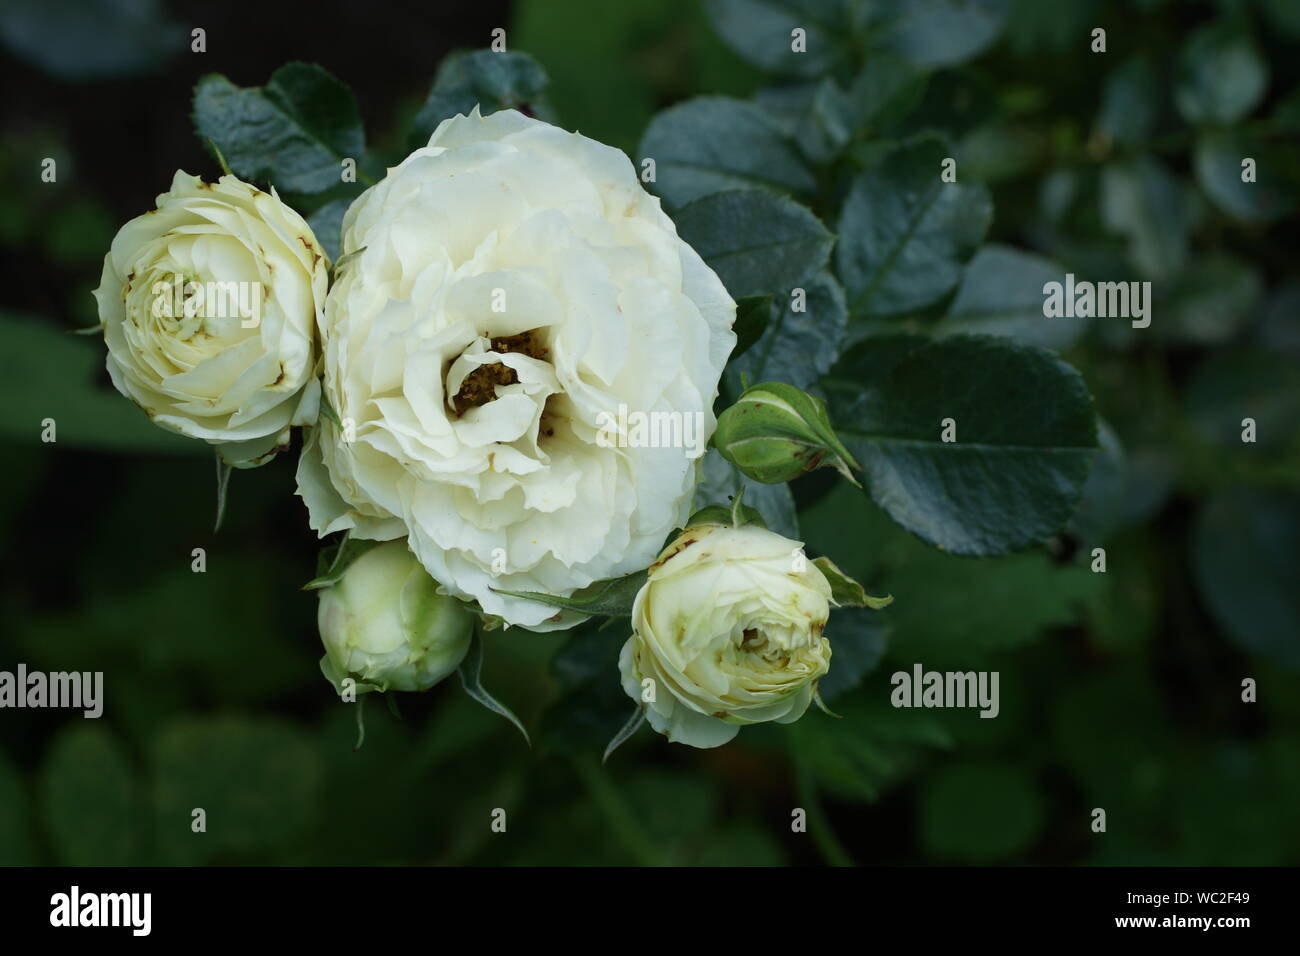 Lemon Rokoko beautiful creamy roses. Flowers in a garden in natural conditions among greenery, under the open sky. Stock Photo